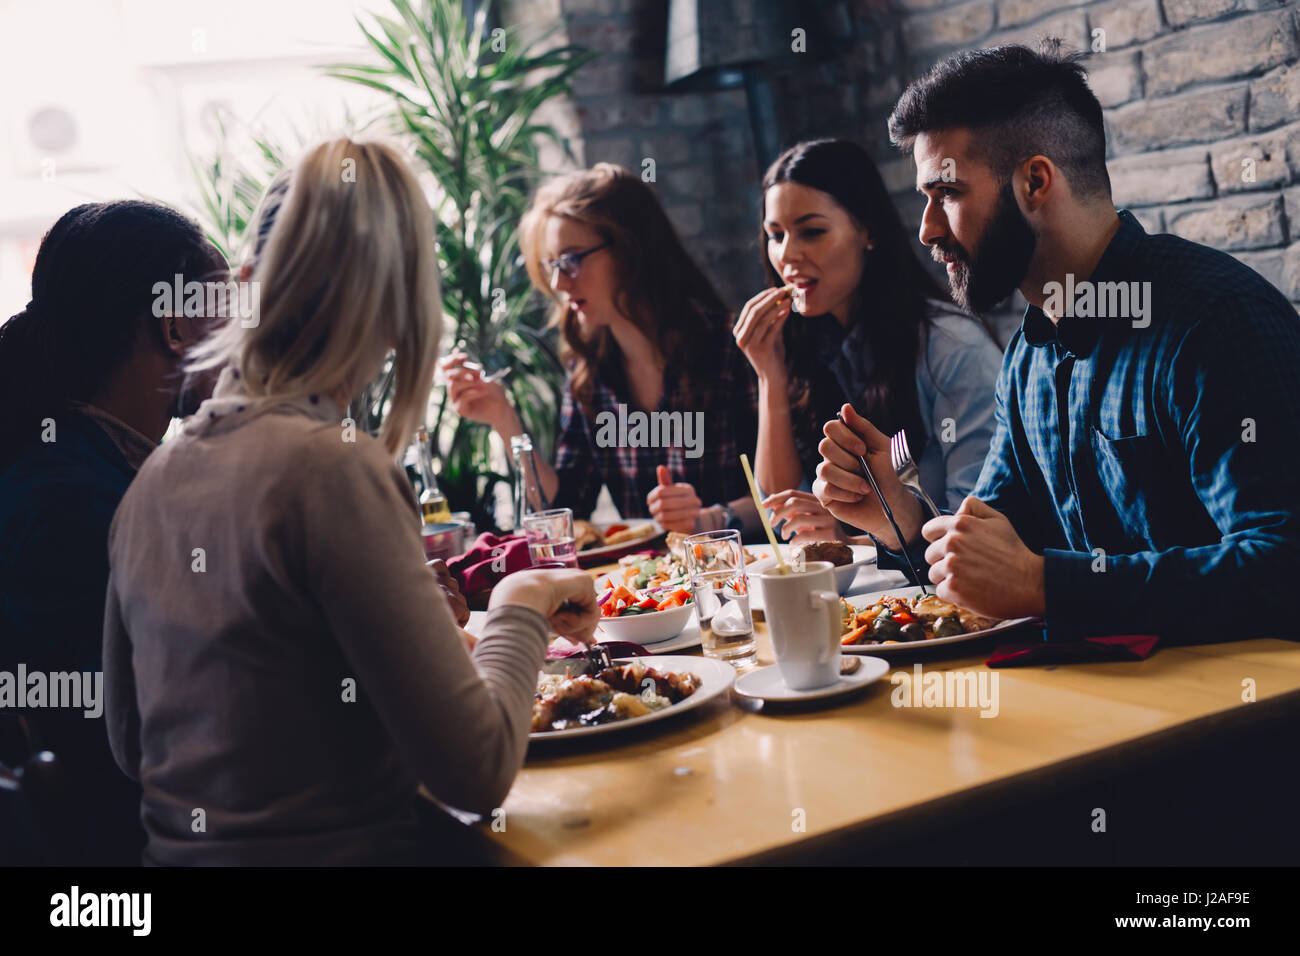 Group of happy business people eating together in restaurant Stock Photo